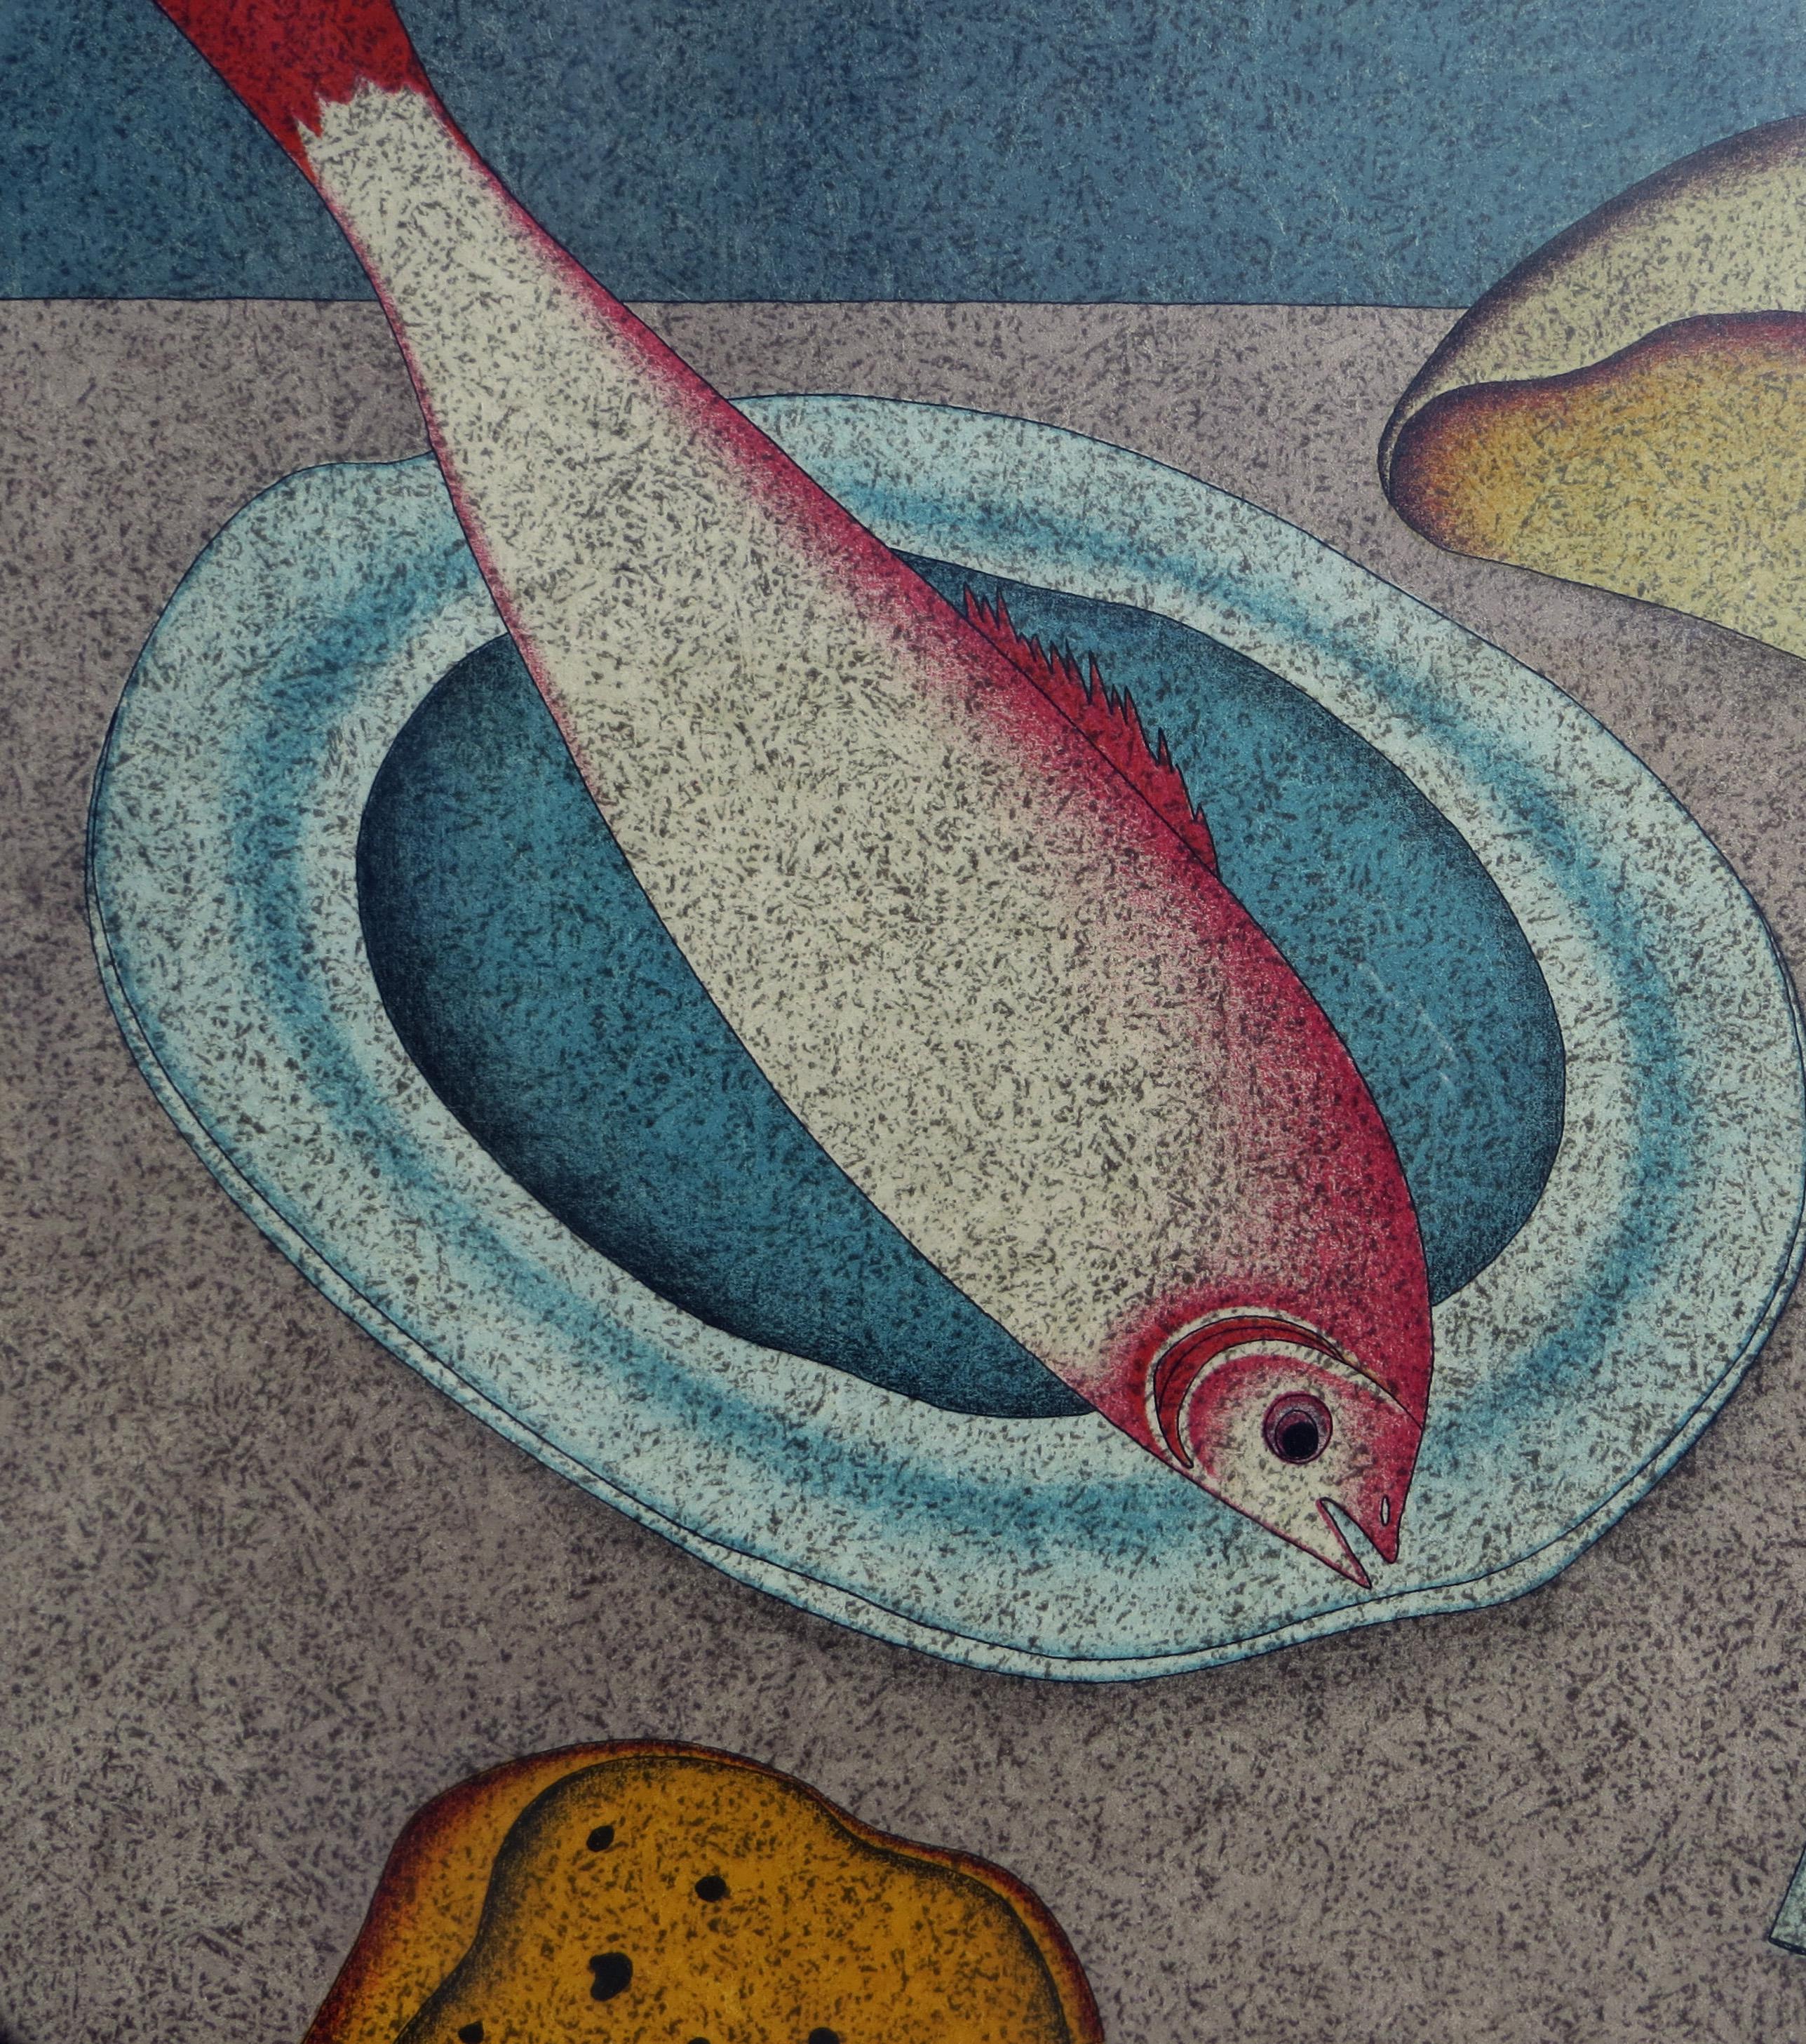 Still Life with Fish, Bread and Knife 2